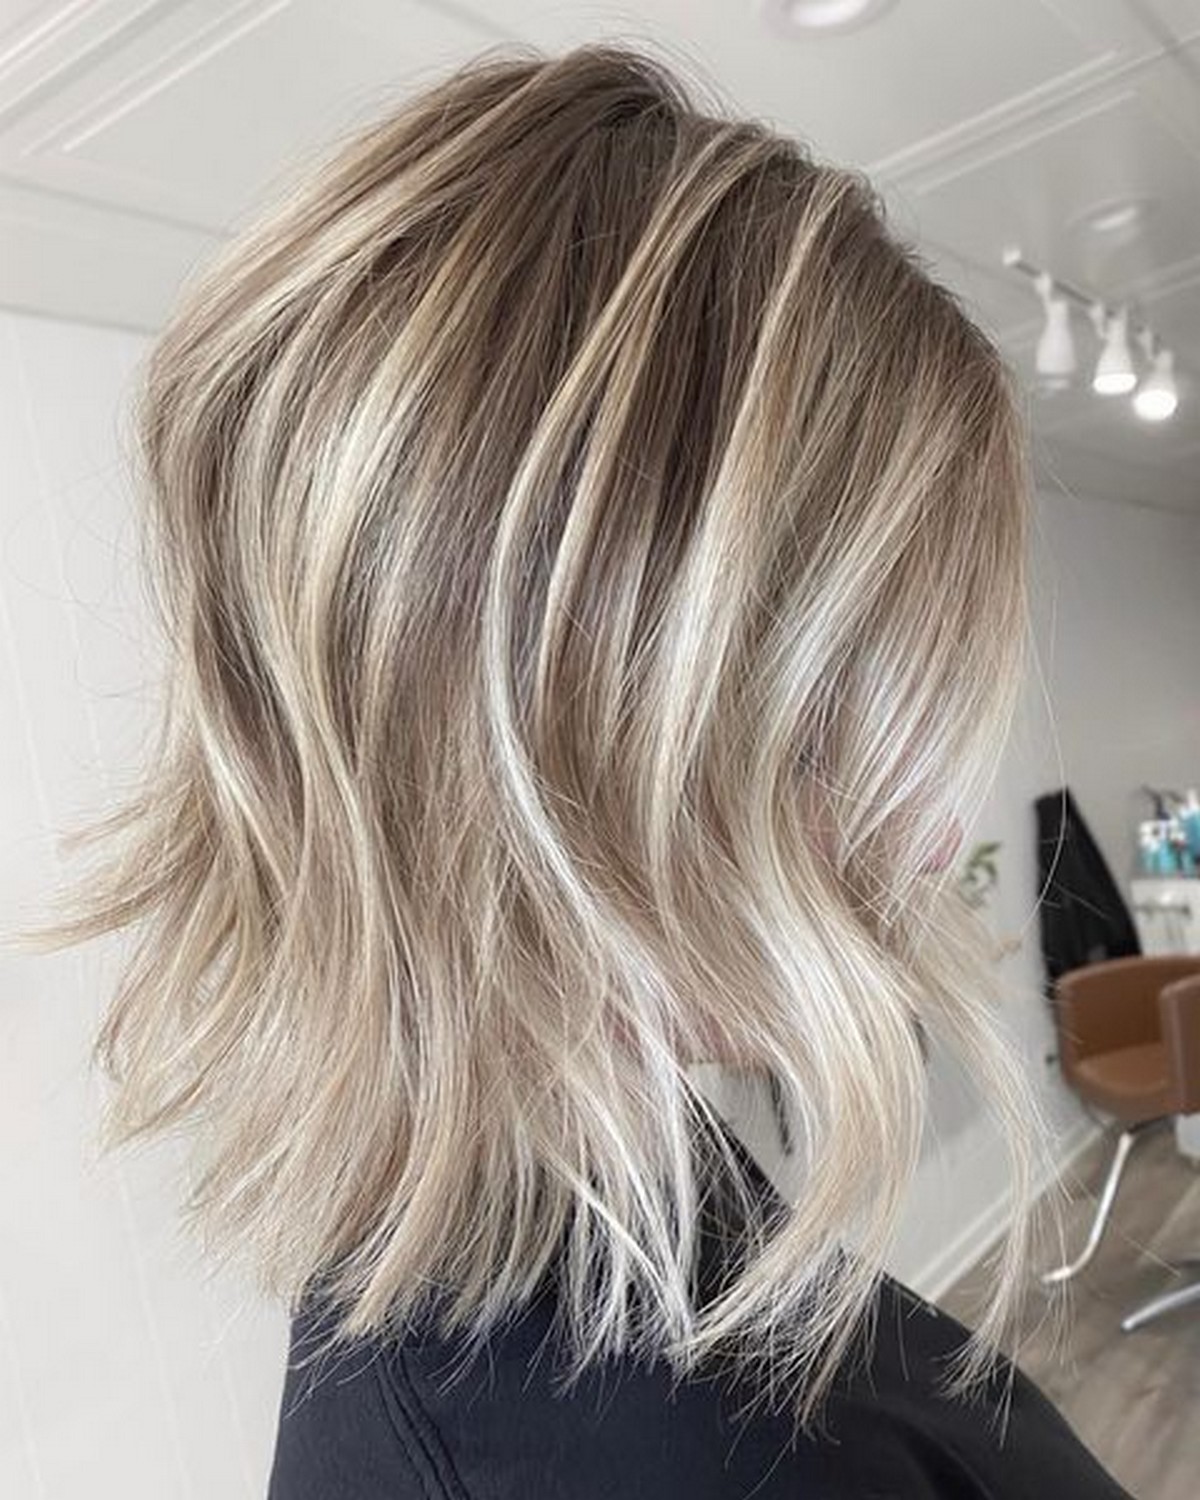 Textured Lob With Hair Contouring